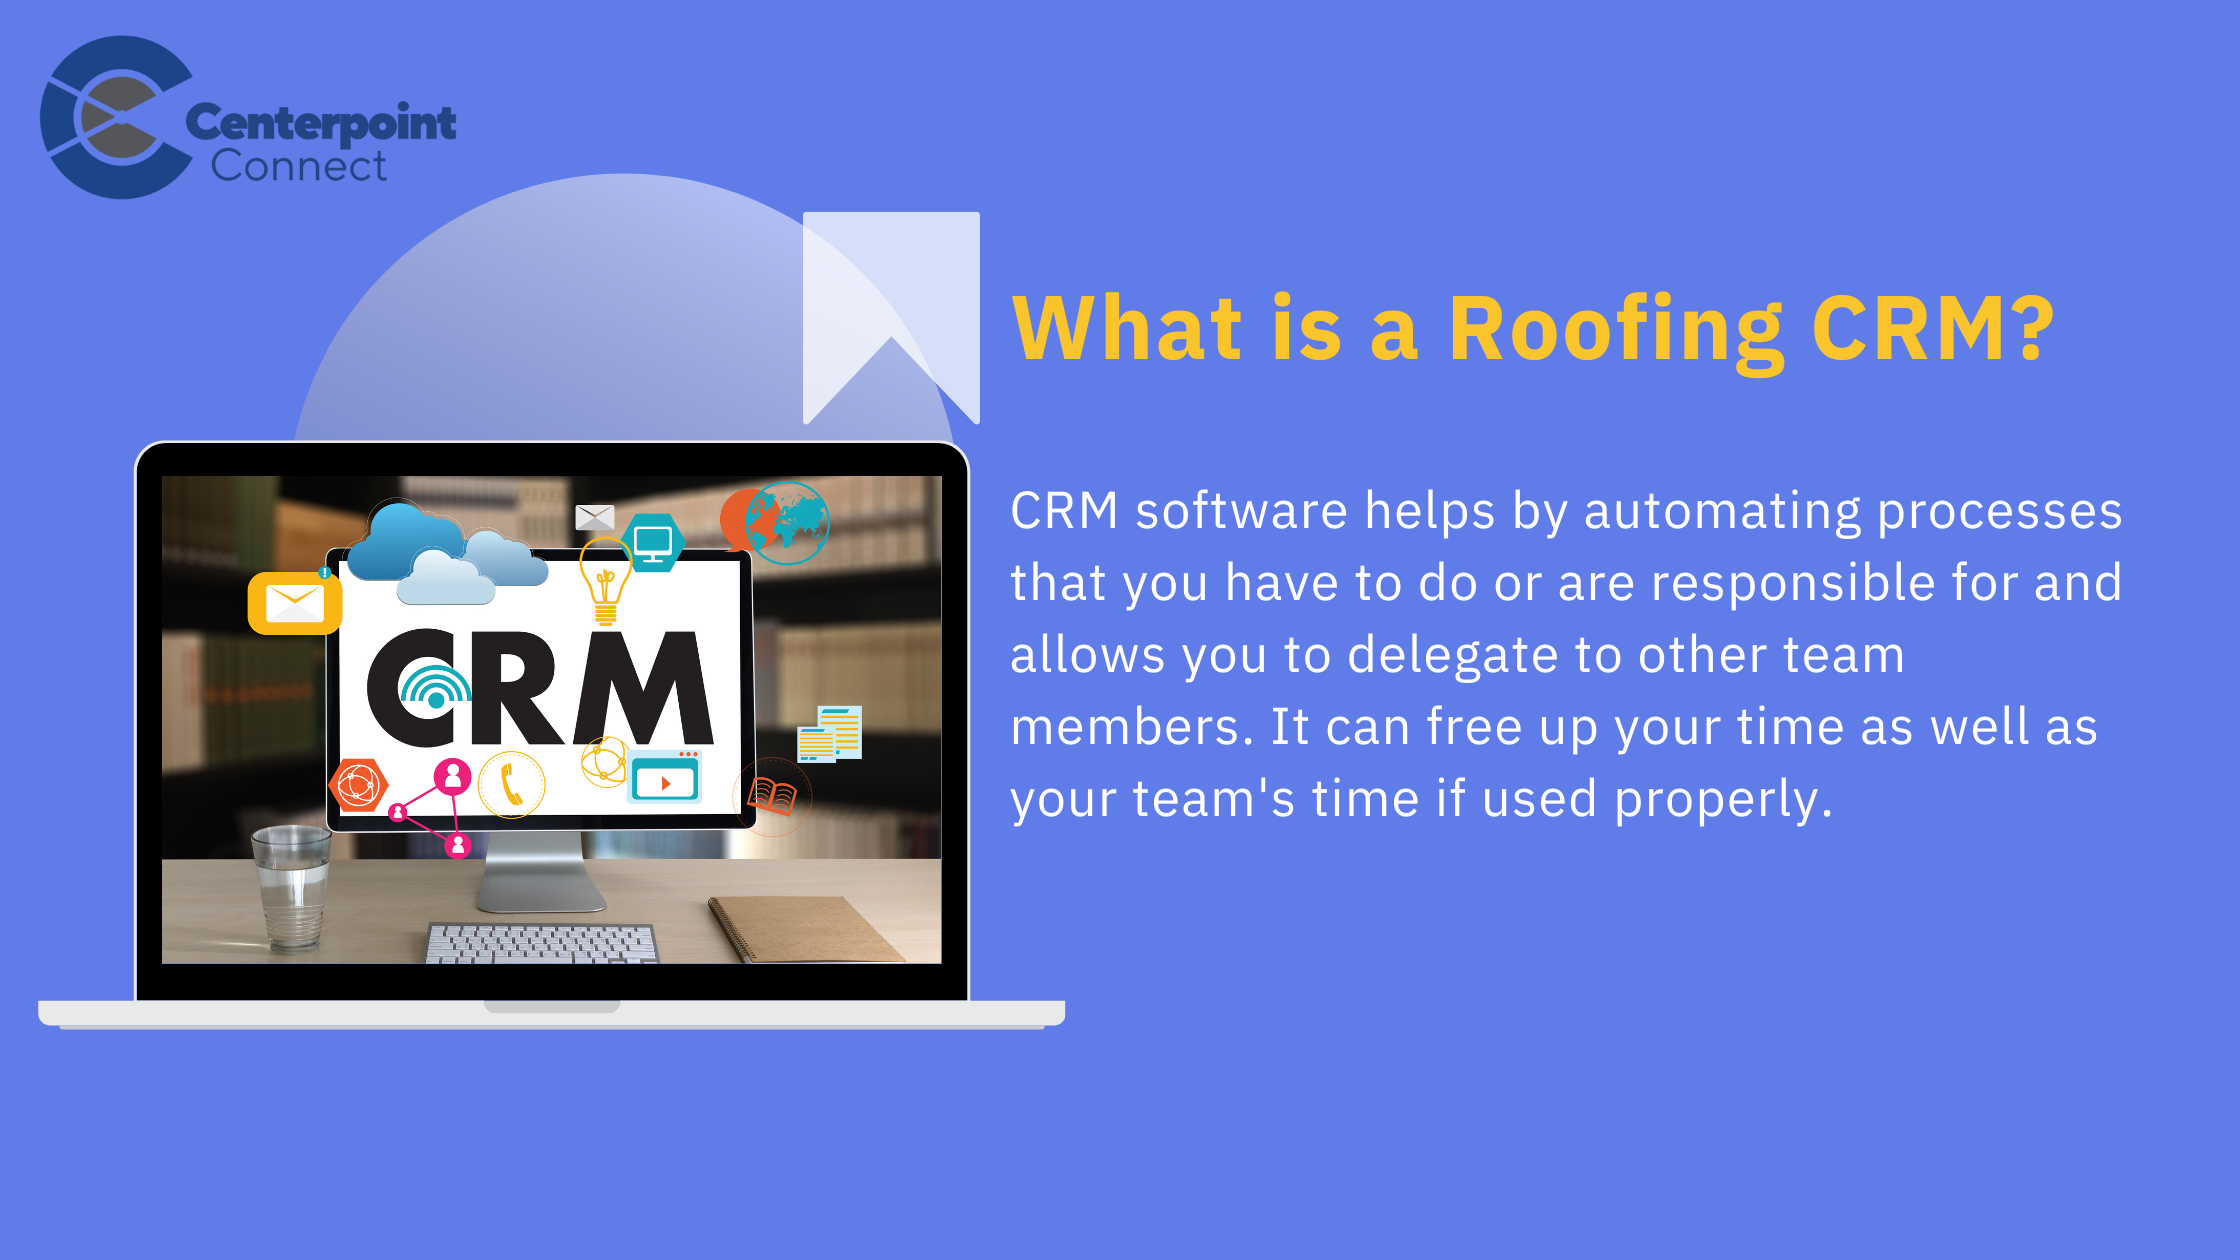 What is a Roofing CRM?